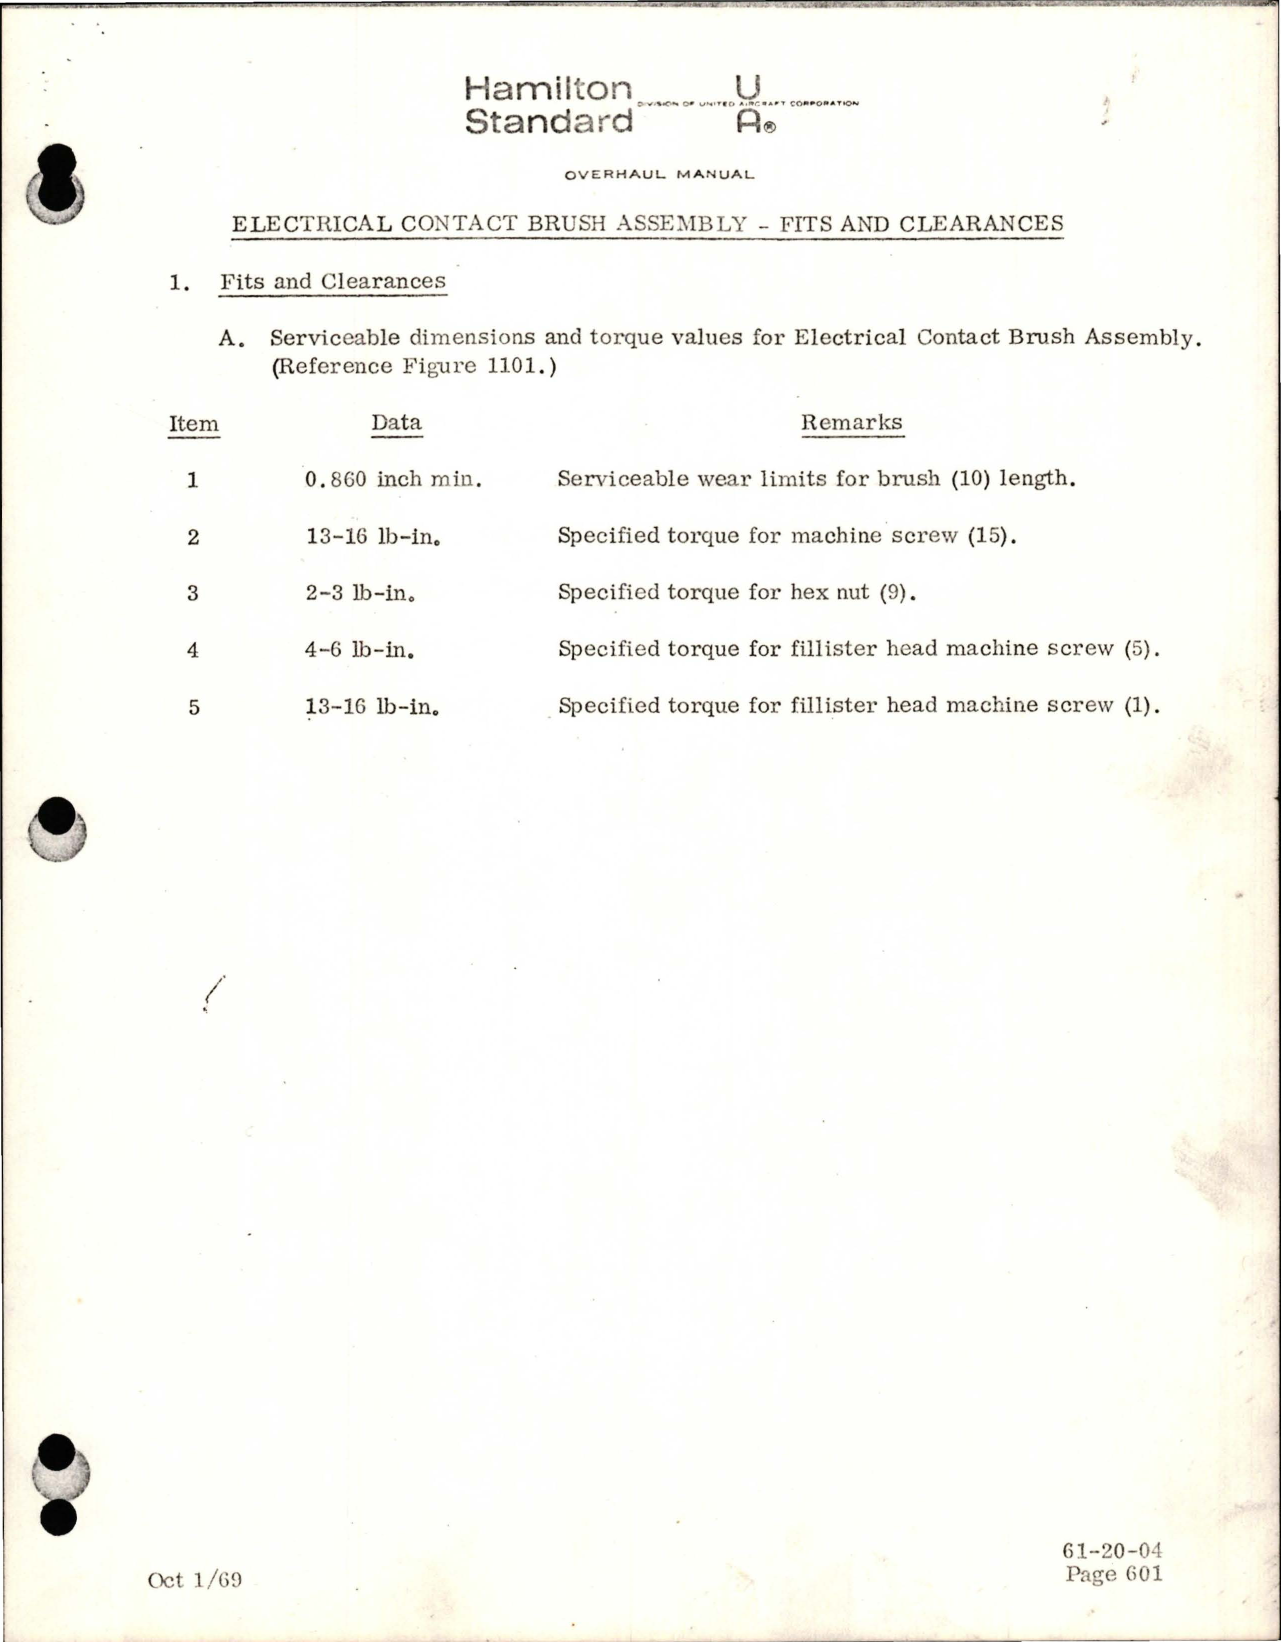 Sample page 9 from AirCorps Library document: Overhaul Manual for Electrical Contact Brush Assembly Description and Operation 